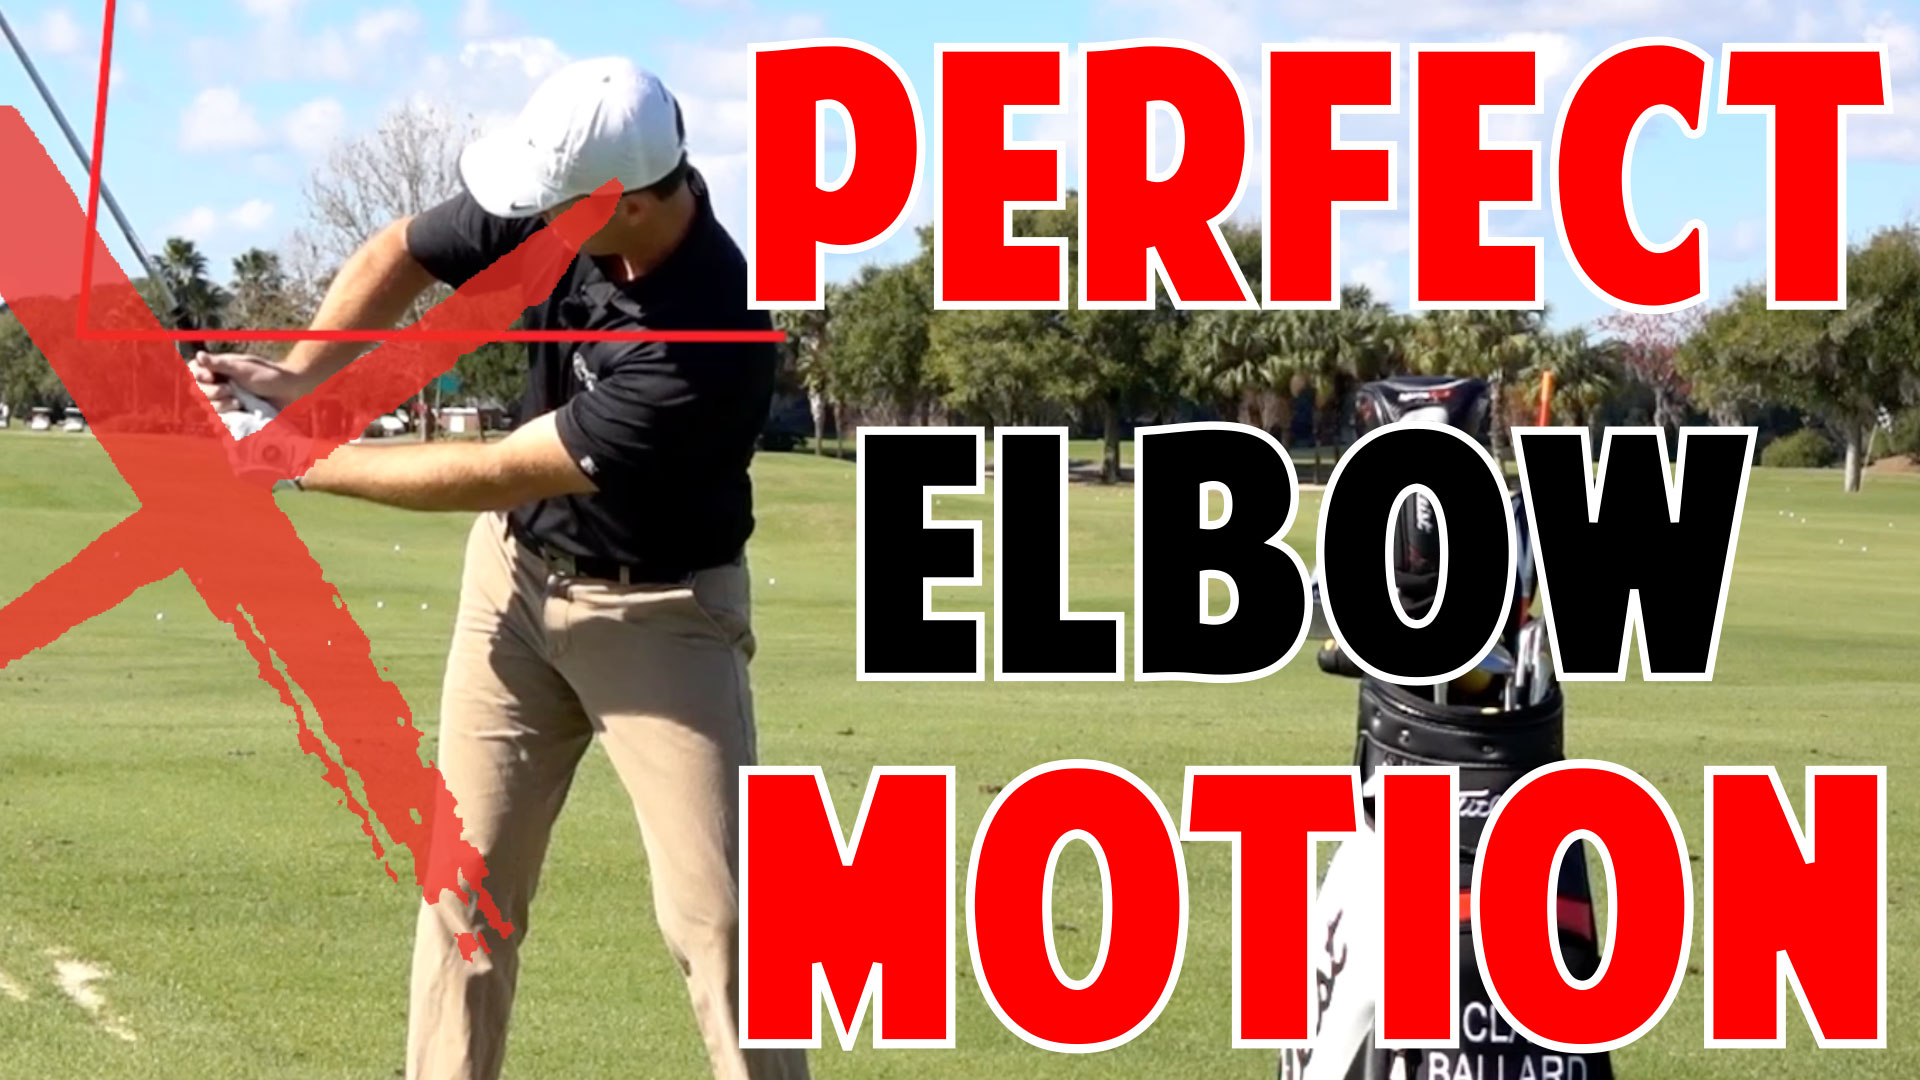 Golf Lesson | Perfect Elbow Motion in Crazy Detail